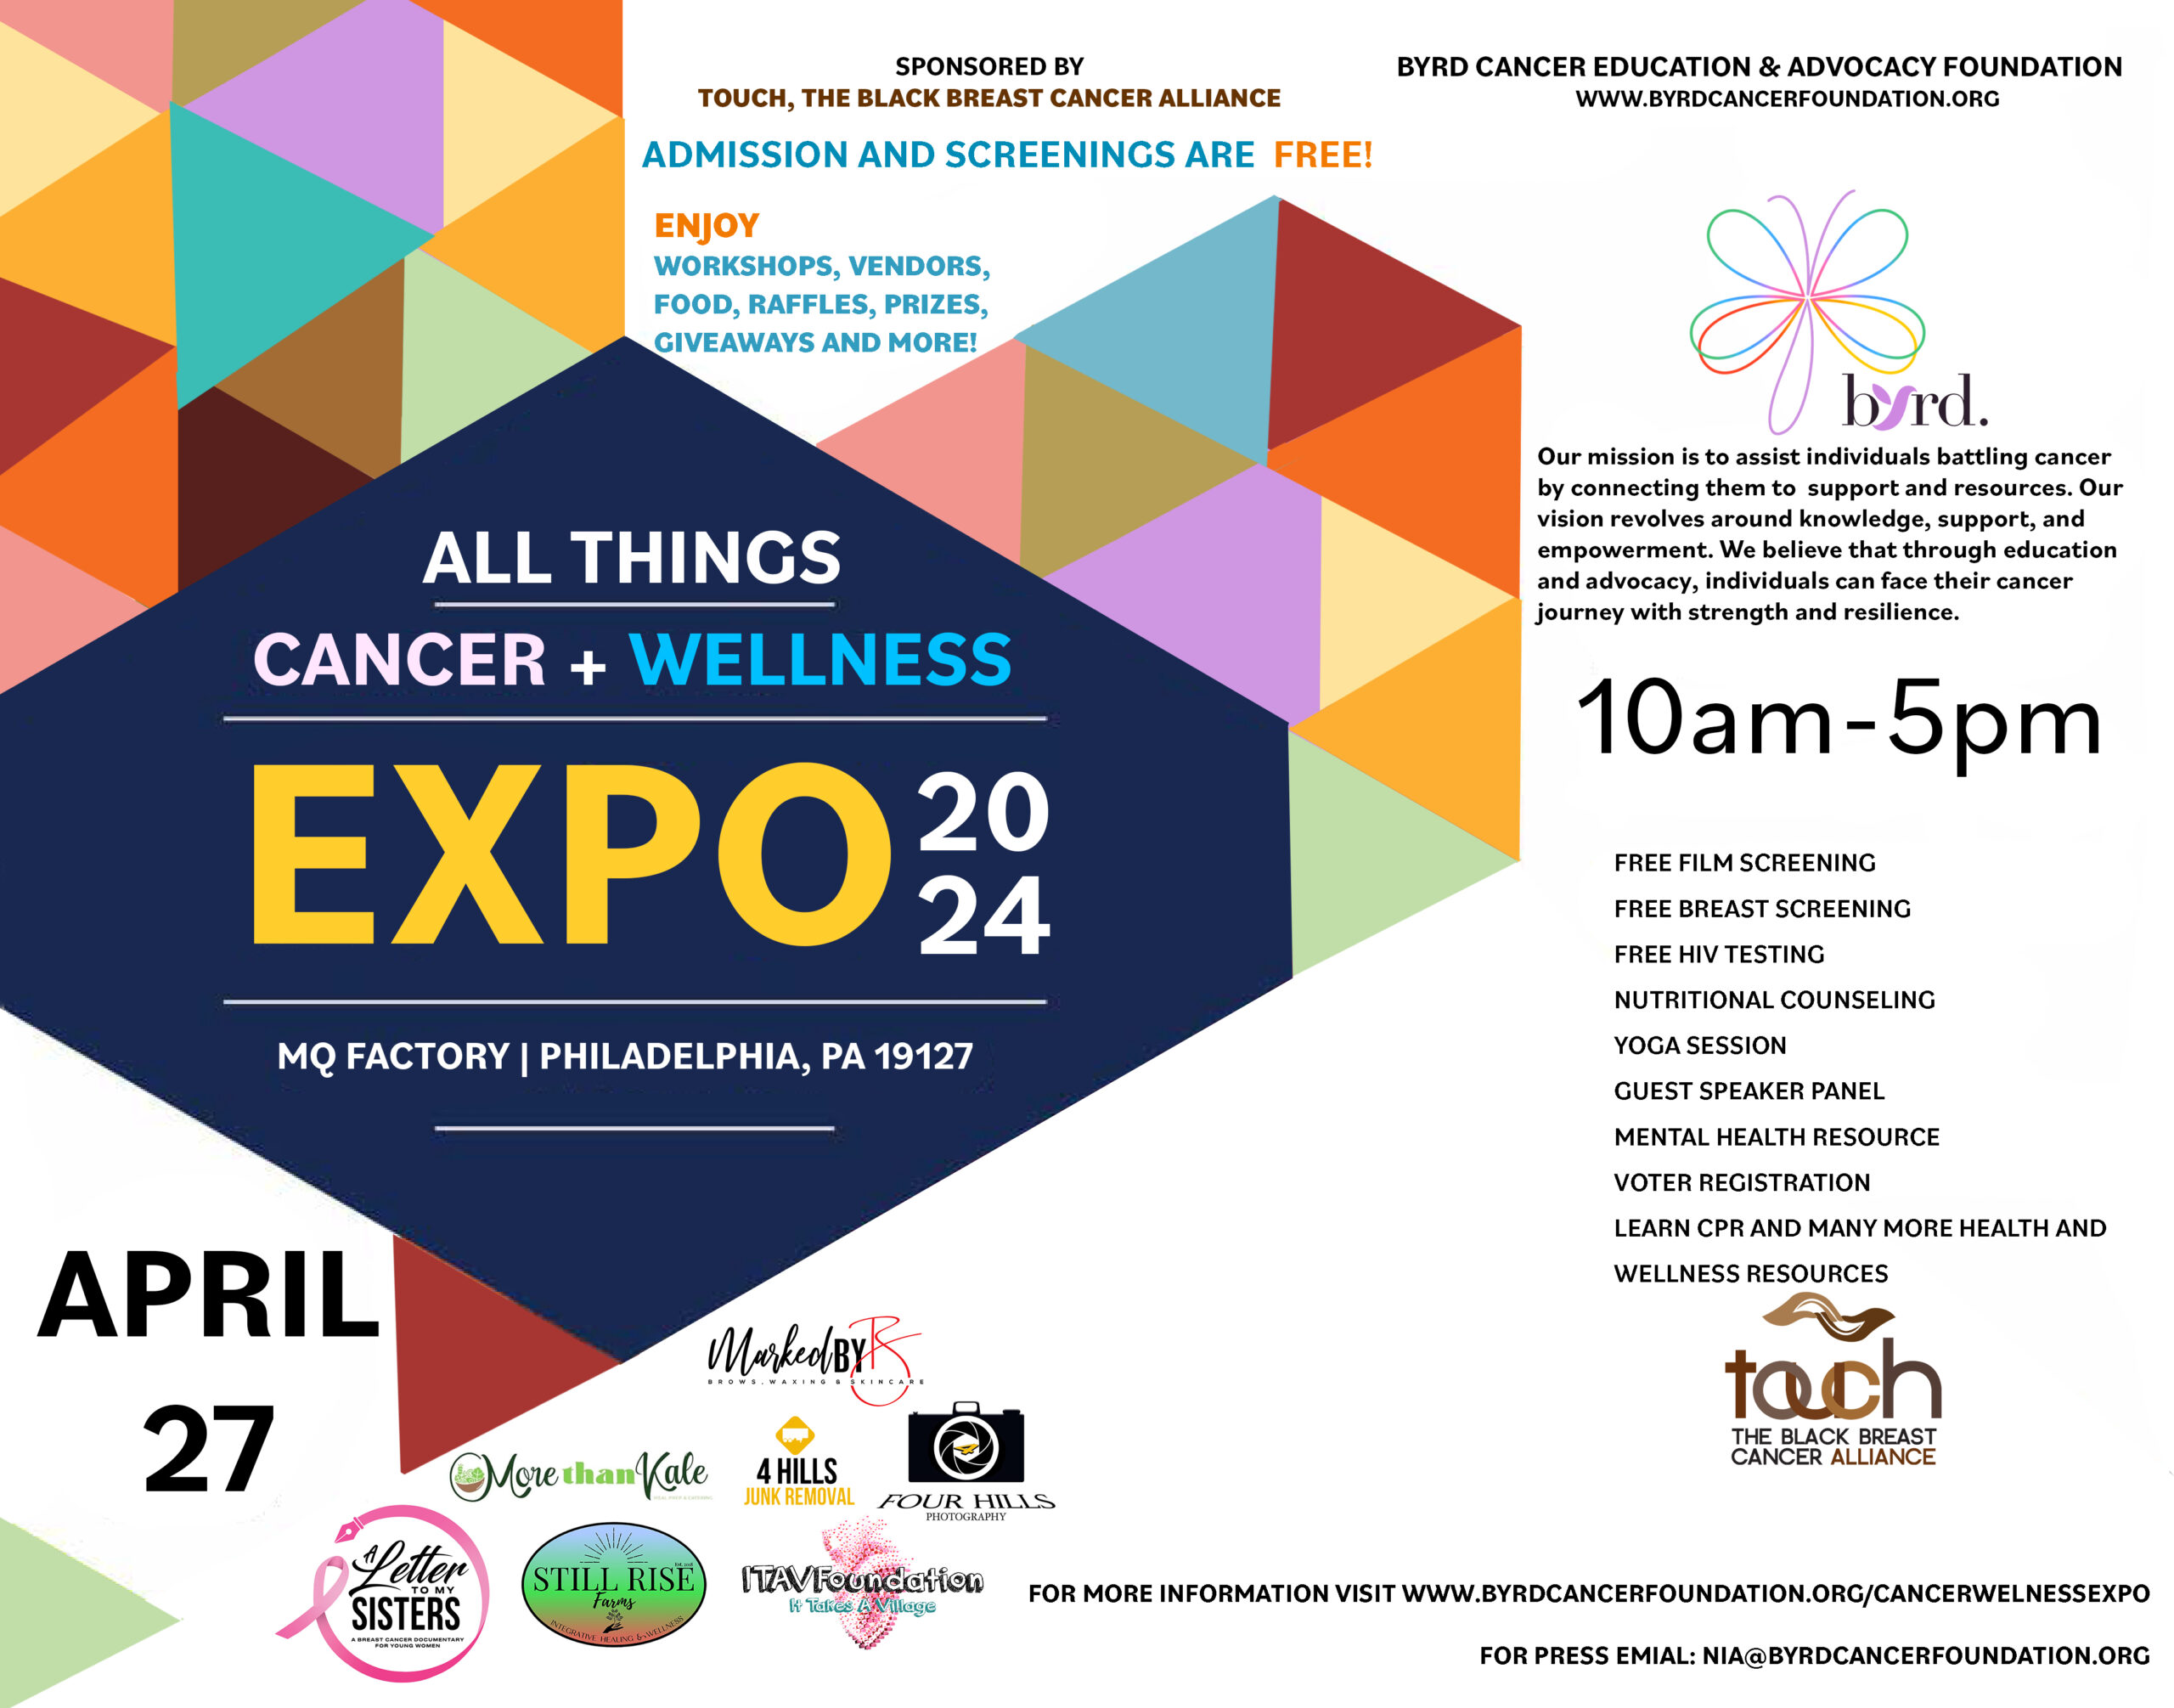 All Things Cancer & Wellness Expo - Byrd Cancer Education & Advocacy  Foundation